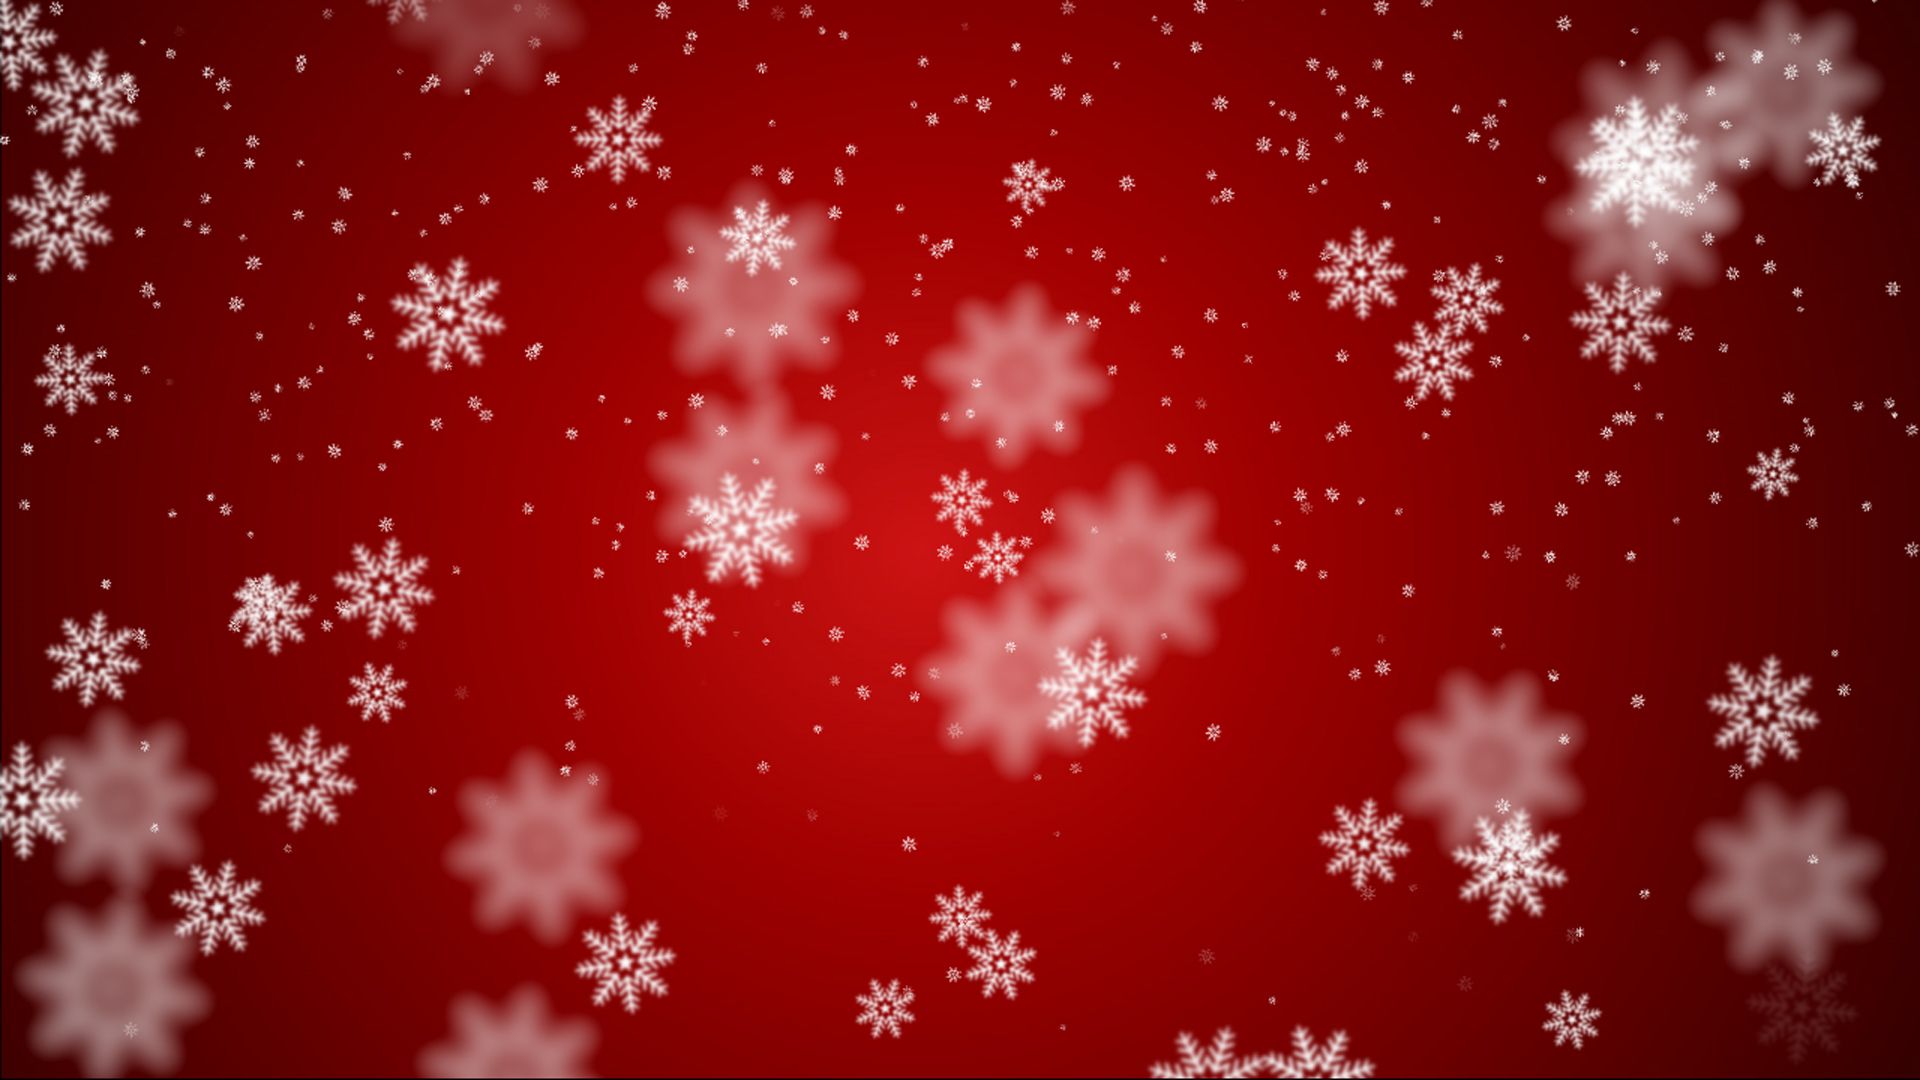 Free Red Xmas Backgrounds For PowerPoint - Christmas PPT Templates